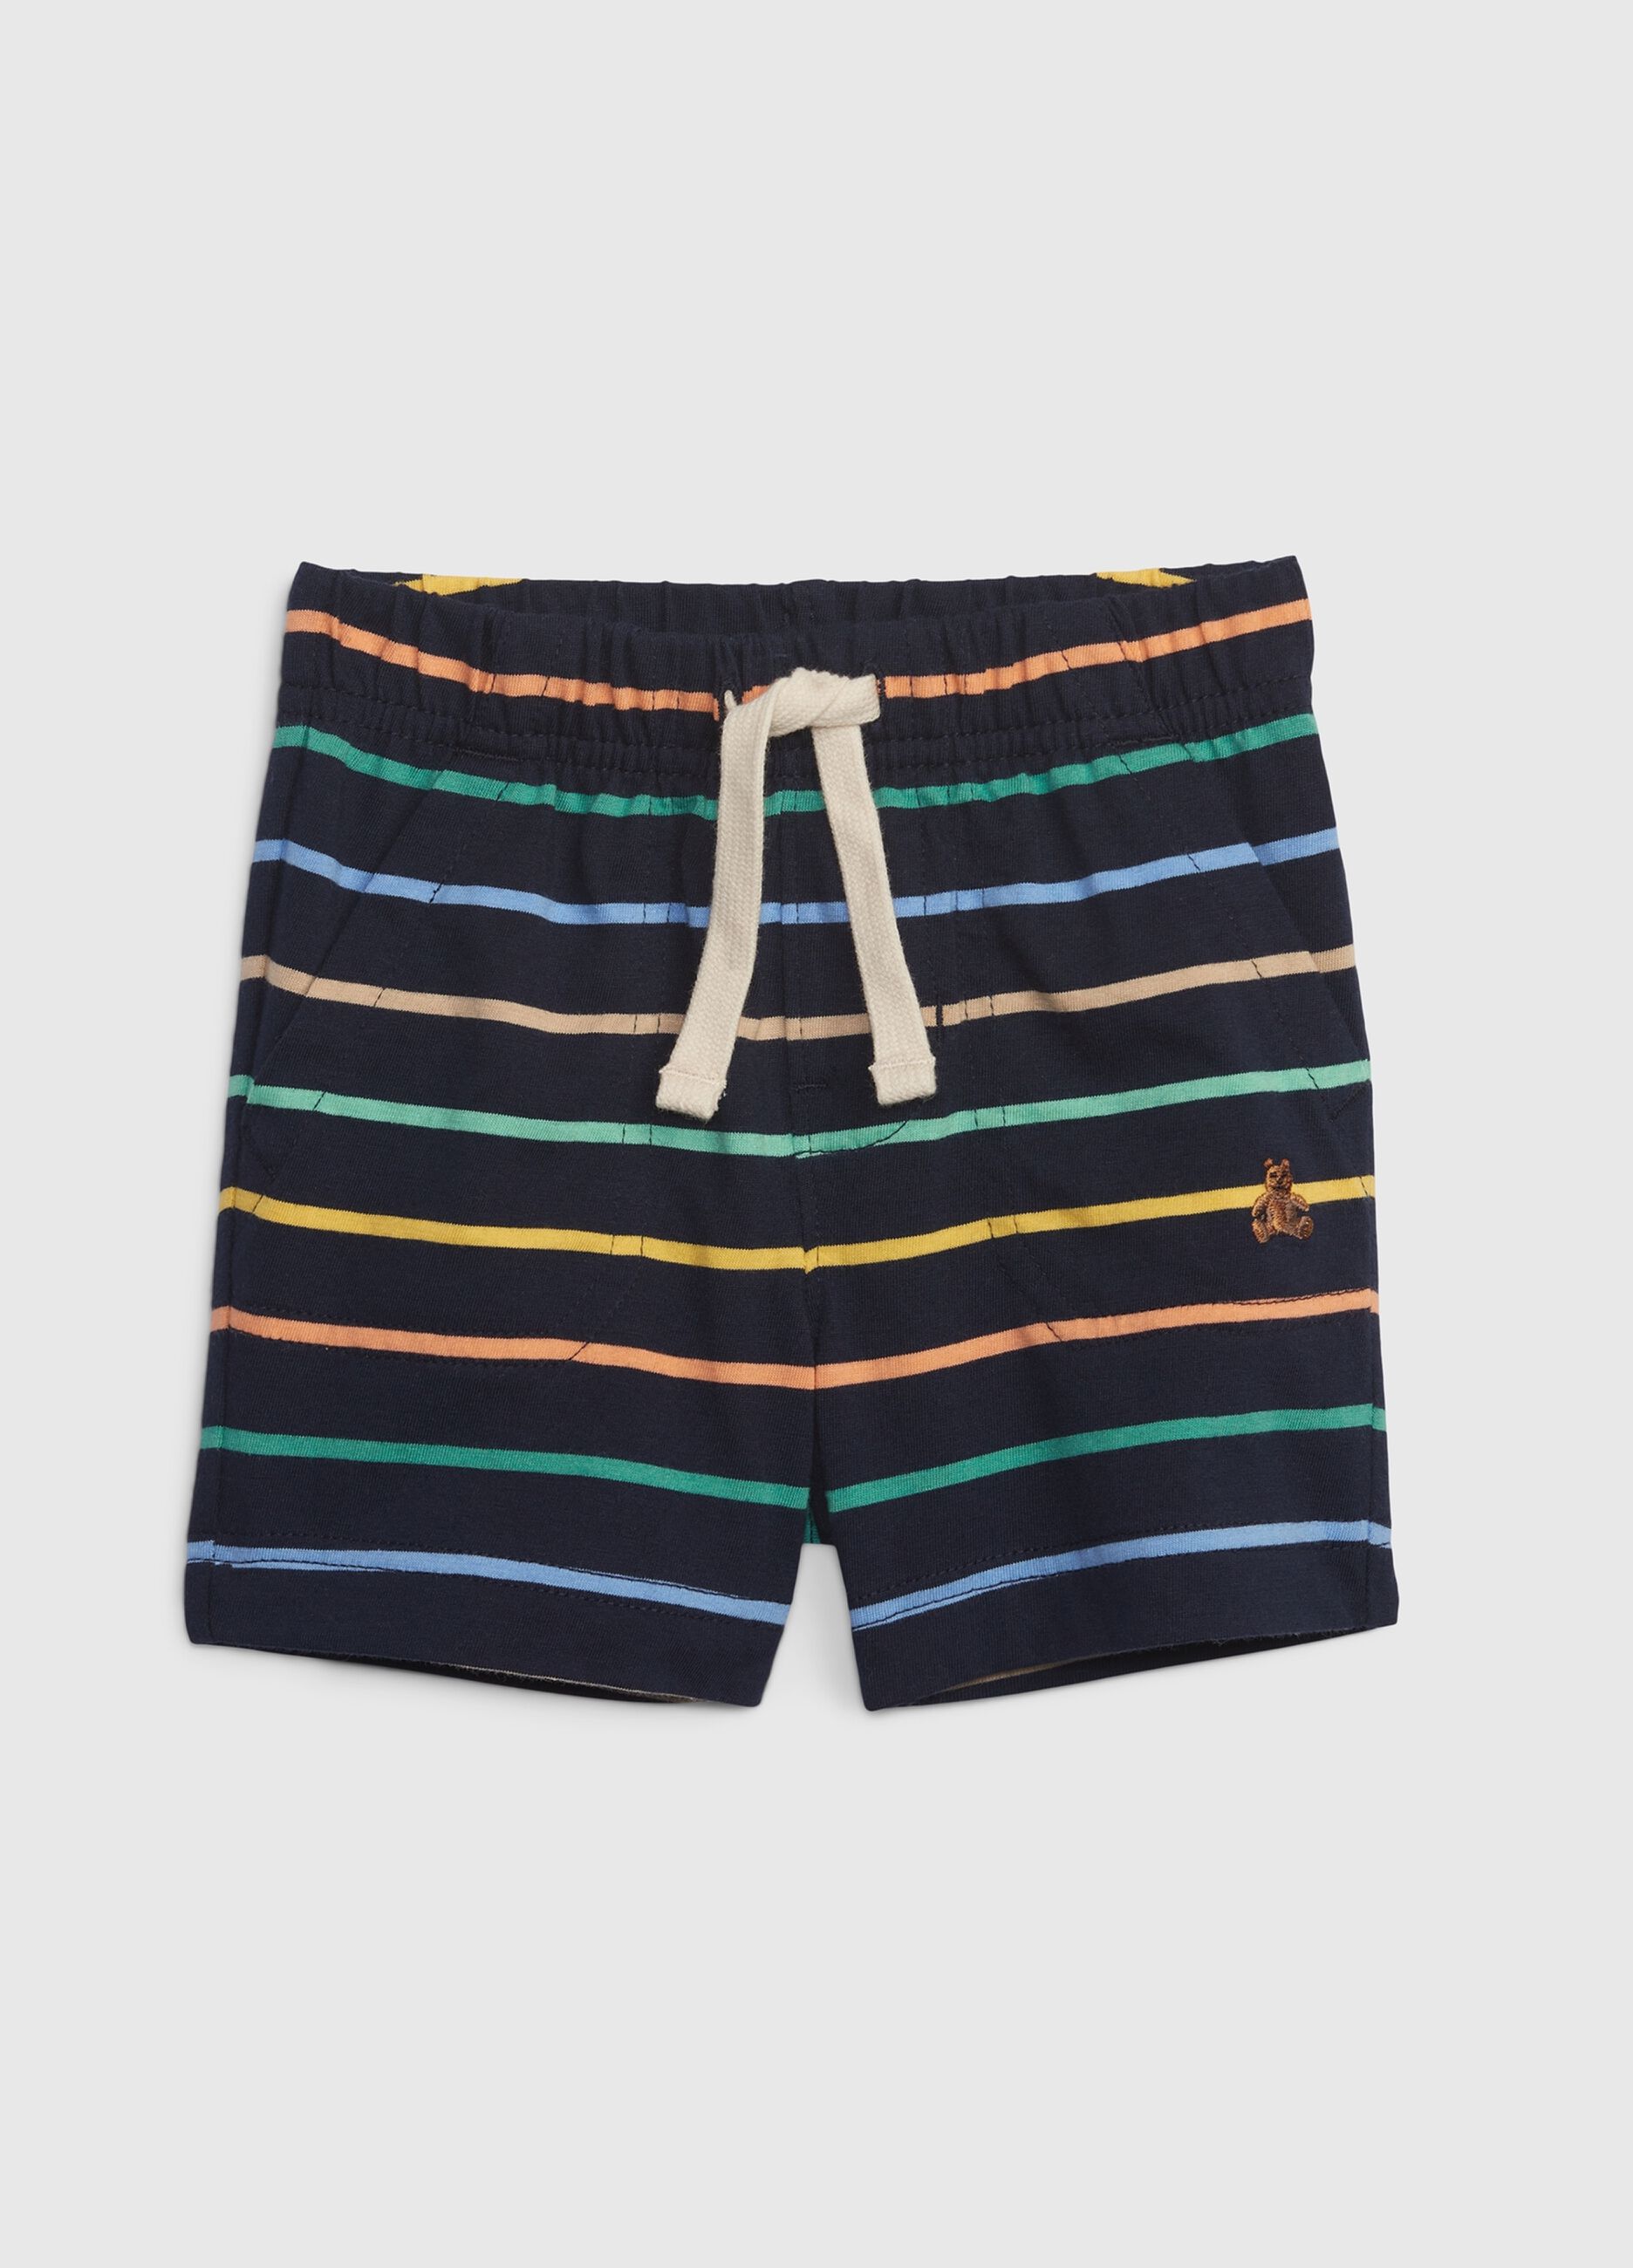 Striped cotton shorts with drawstring